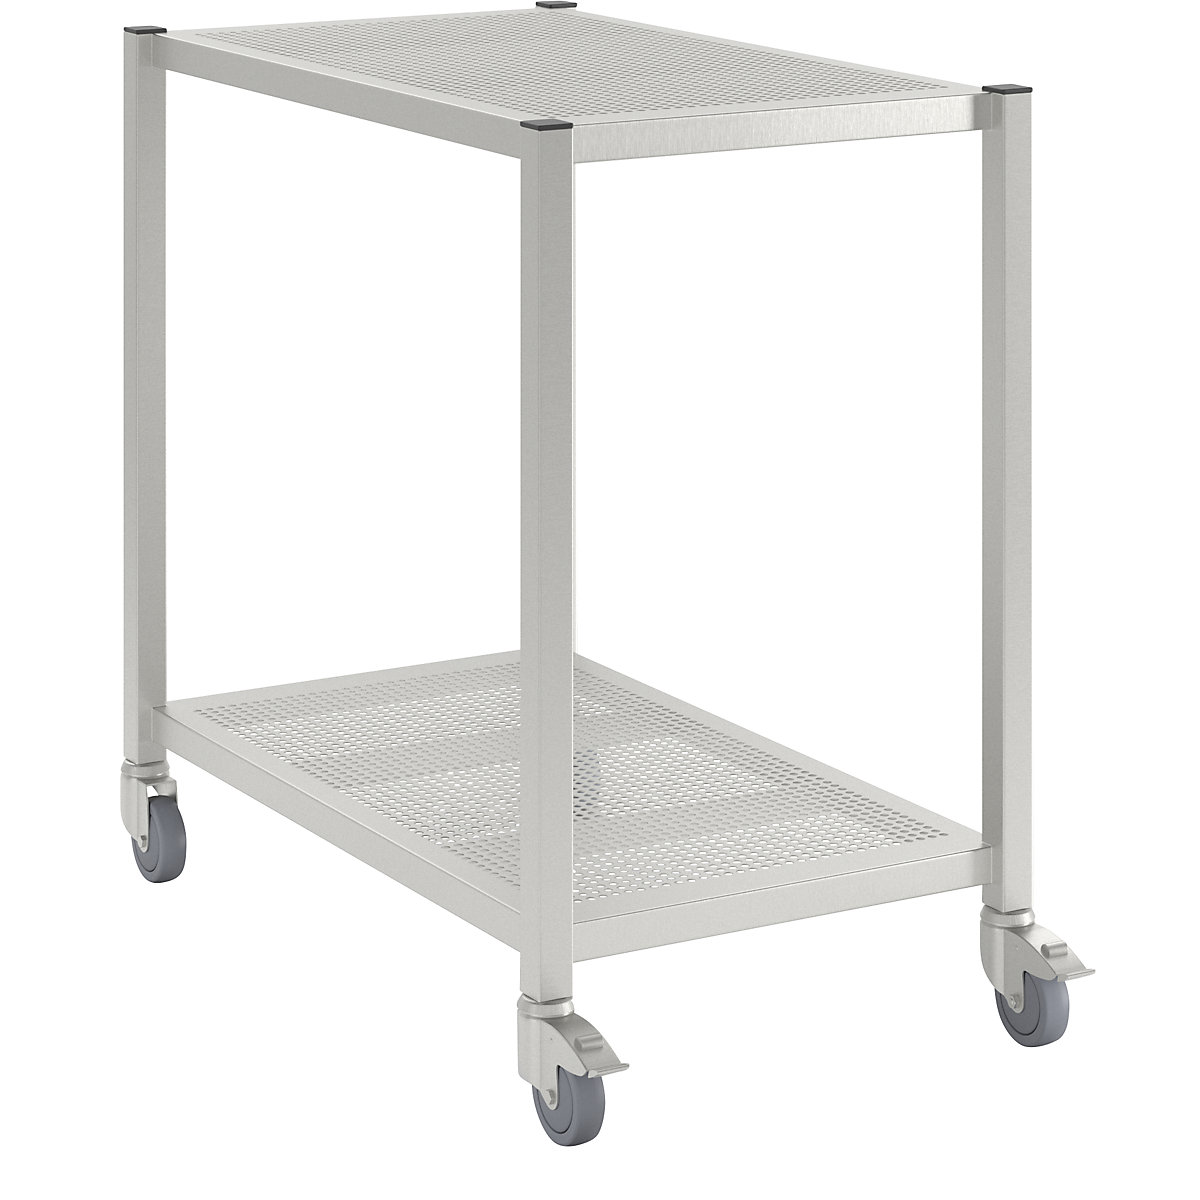 Mobile cleanroom table, made of stainless steel, 2 shelves, length 1000 mm-11